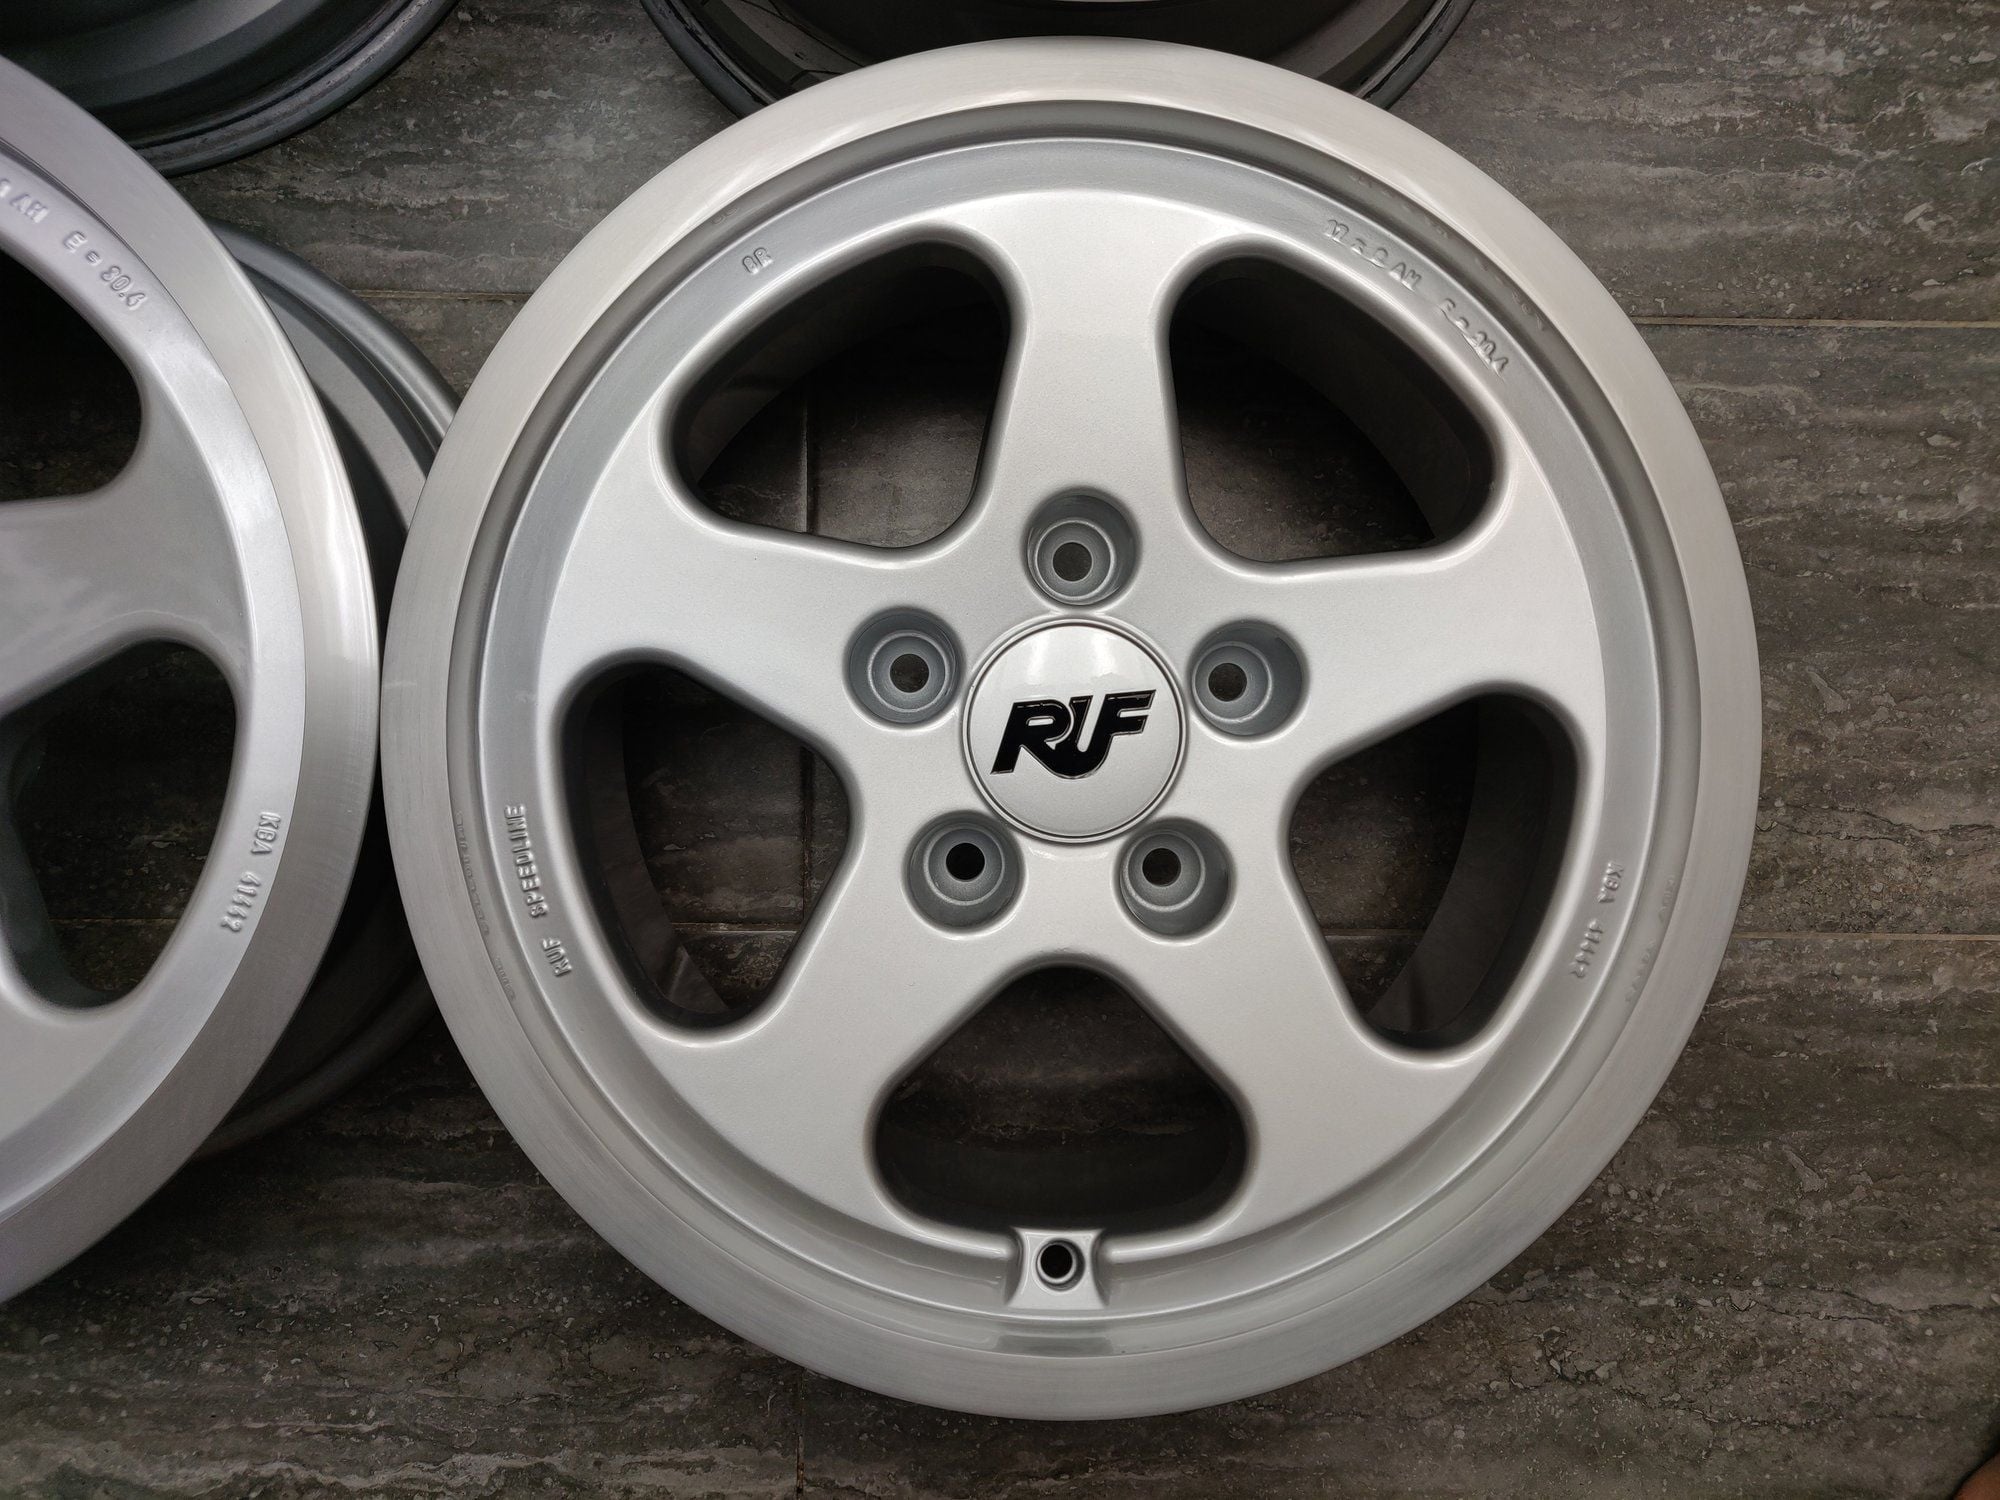 Wheels and Tires/Axles - Original 17x8" and 17x9" RUF Wheels by Speedline - Used - 1978 to 1989 Porsche 911 - 1978 to 1989 Porsche Carrera - Vancouver, BC V5Z4N6, Canada